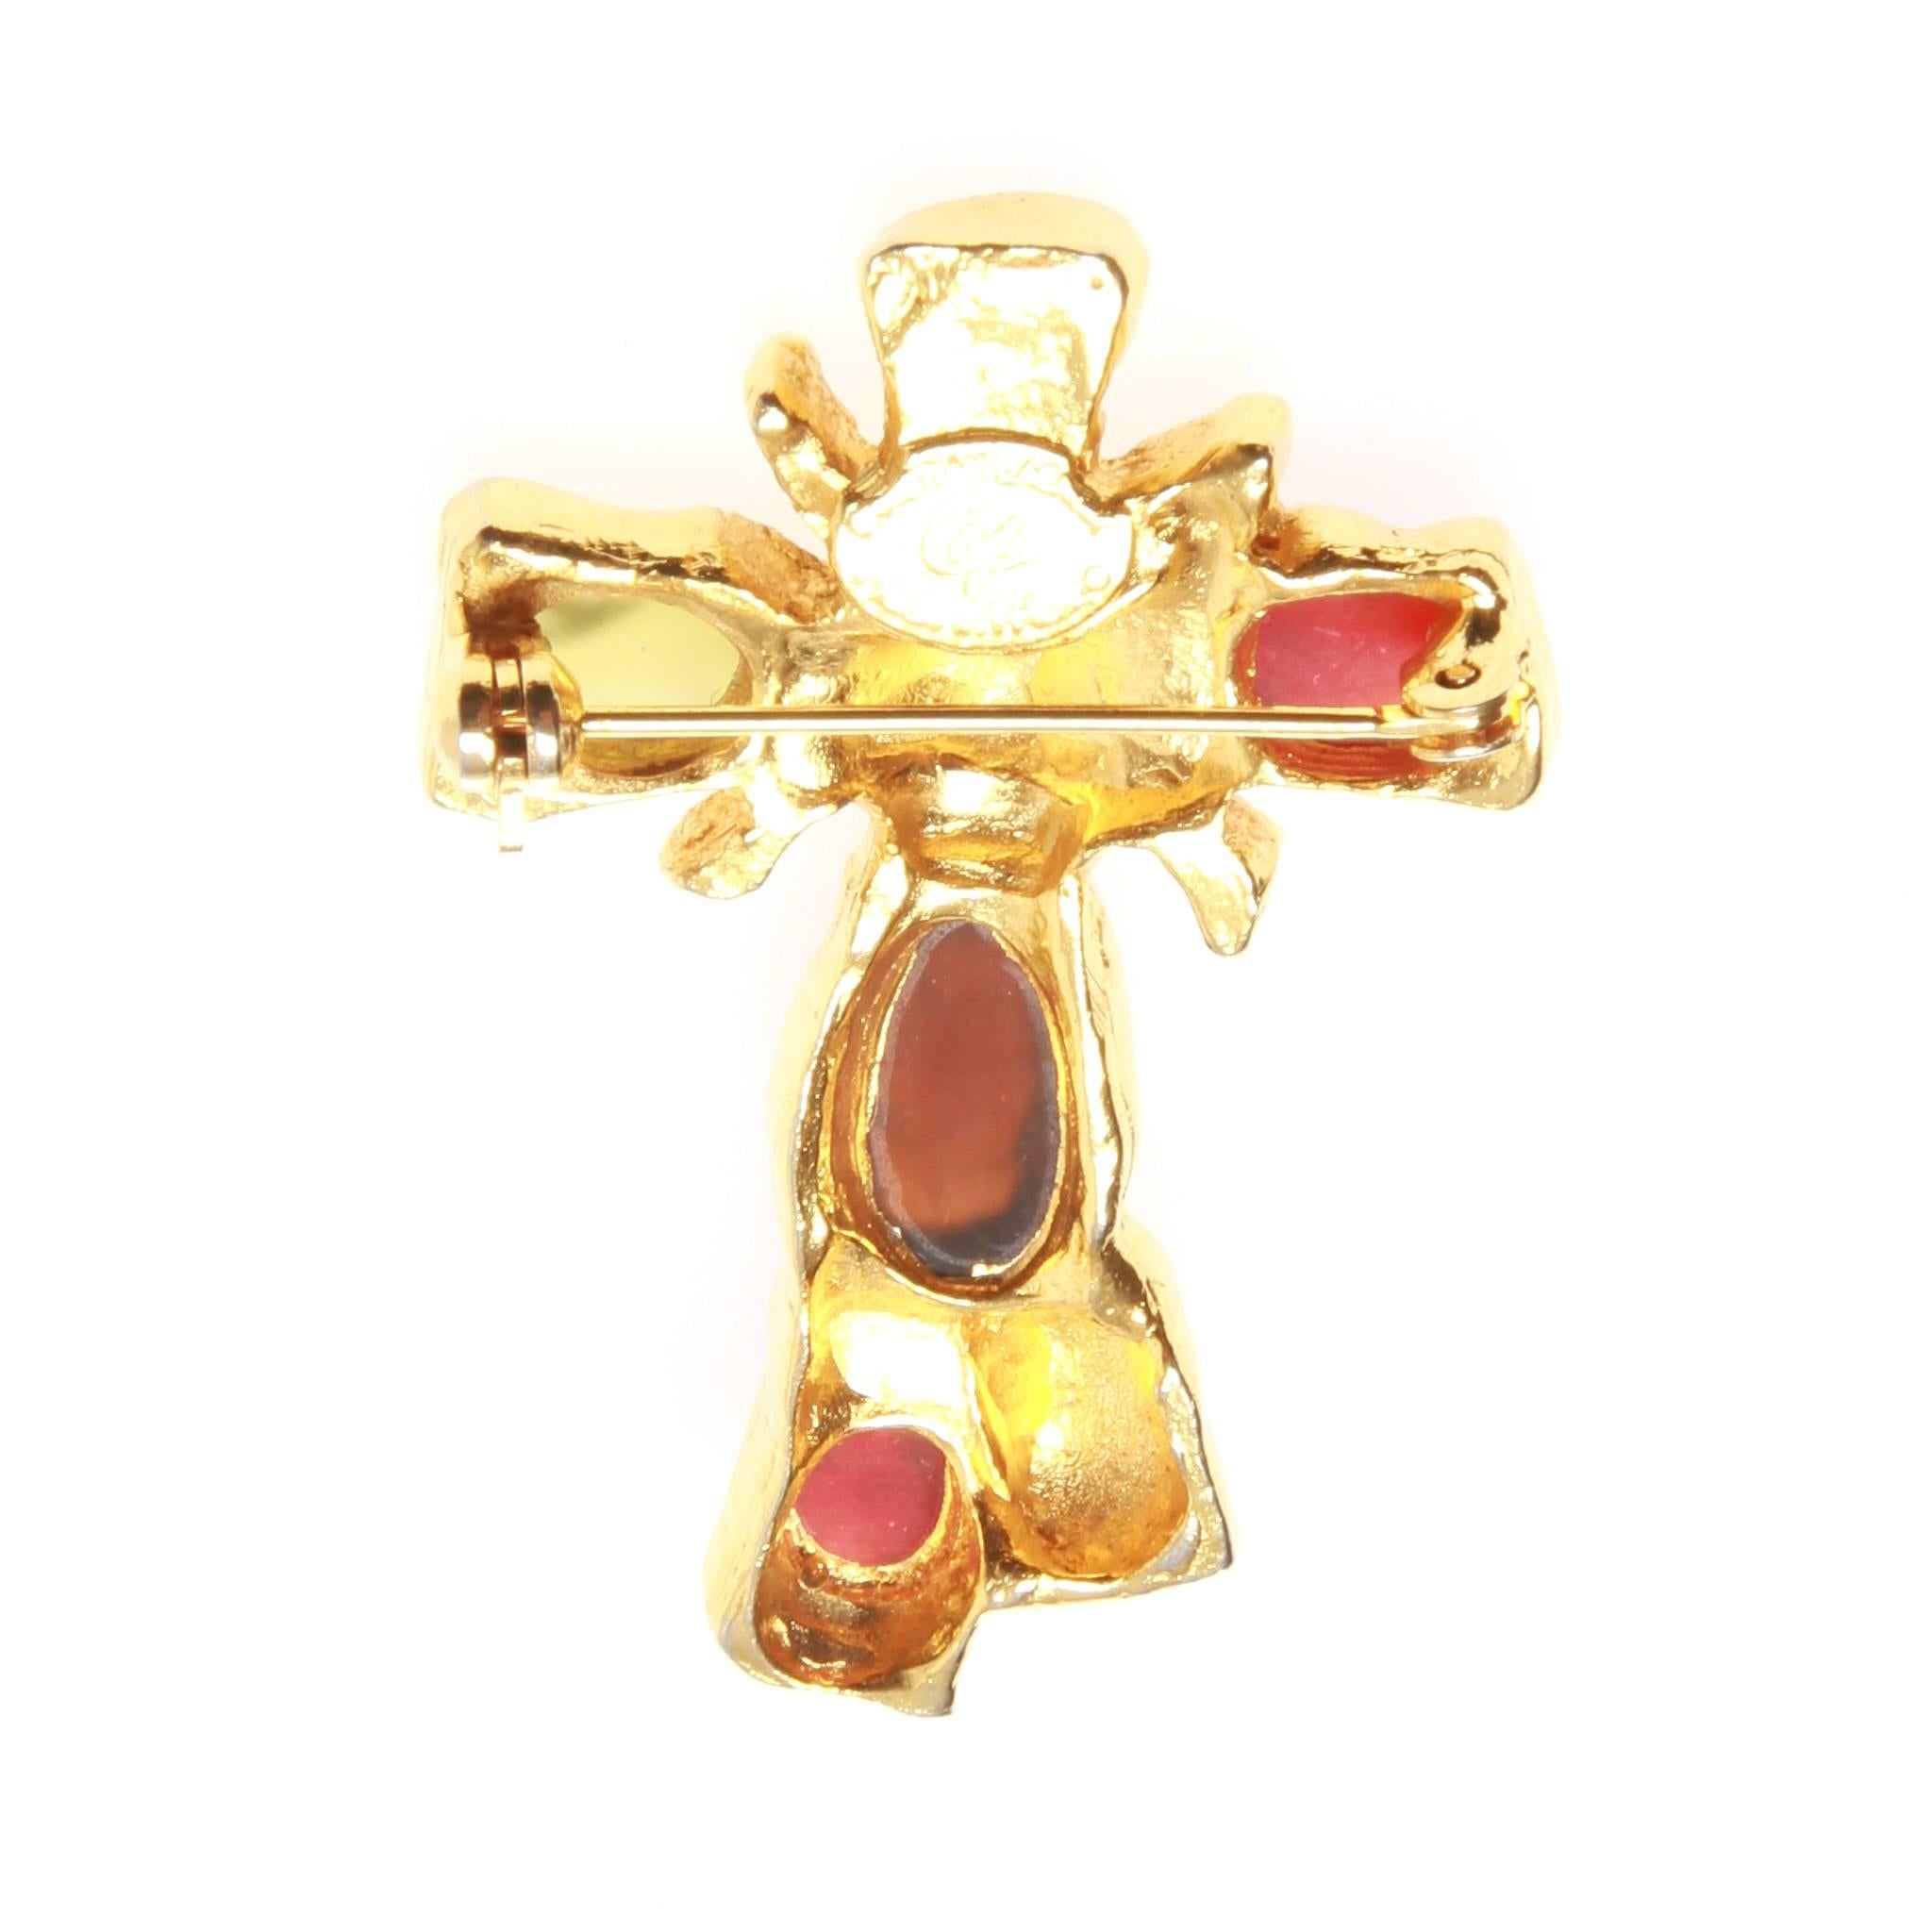 Christian Lacroix vintage brooch formed of vibrant gold-tone metal and coloured glass. 

Engraved: Christian Lacroix CL Made in France 

Roll needle fastening